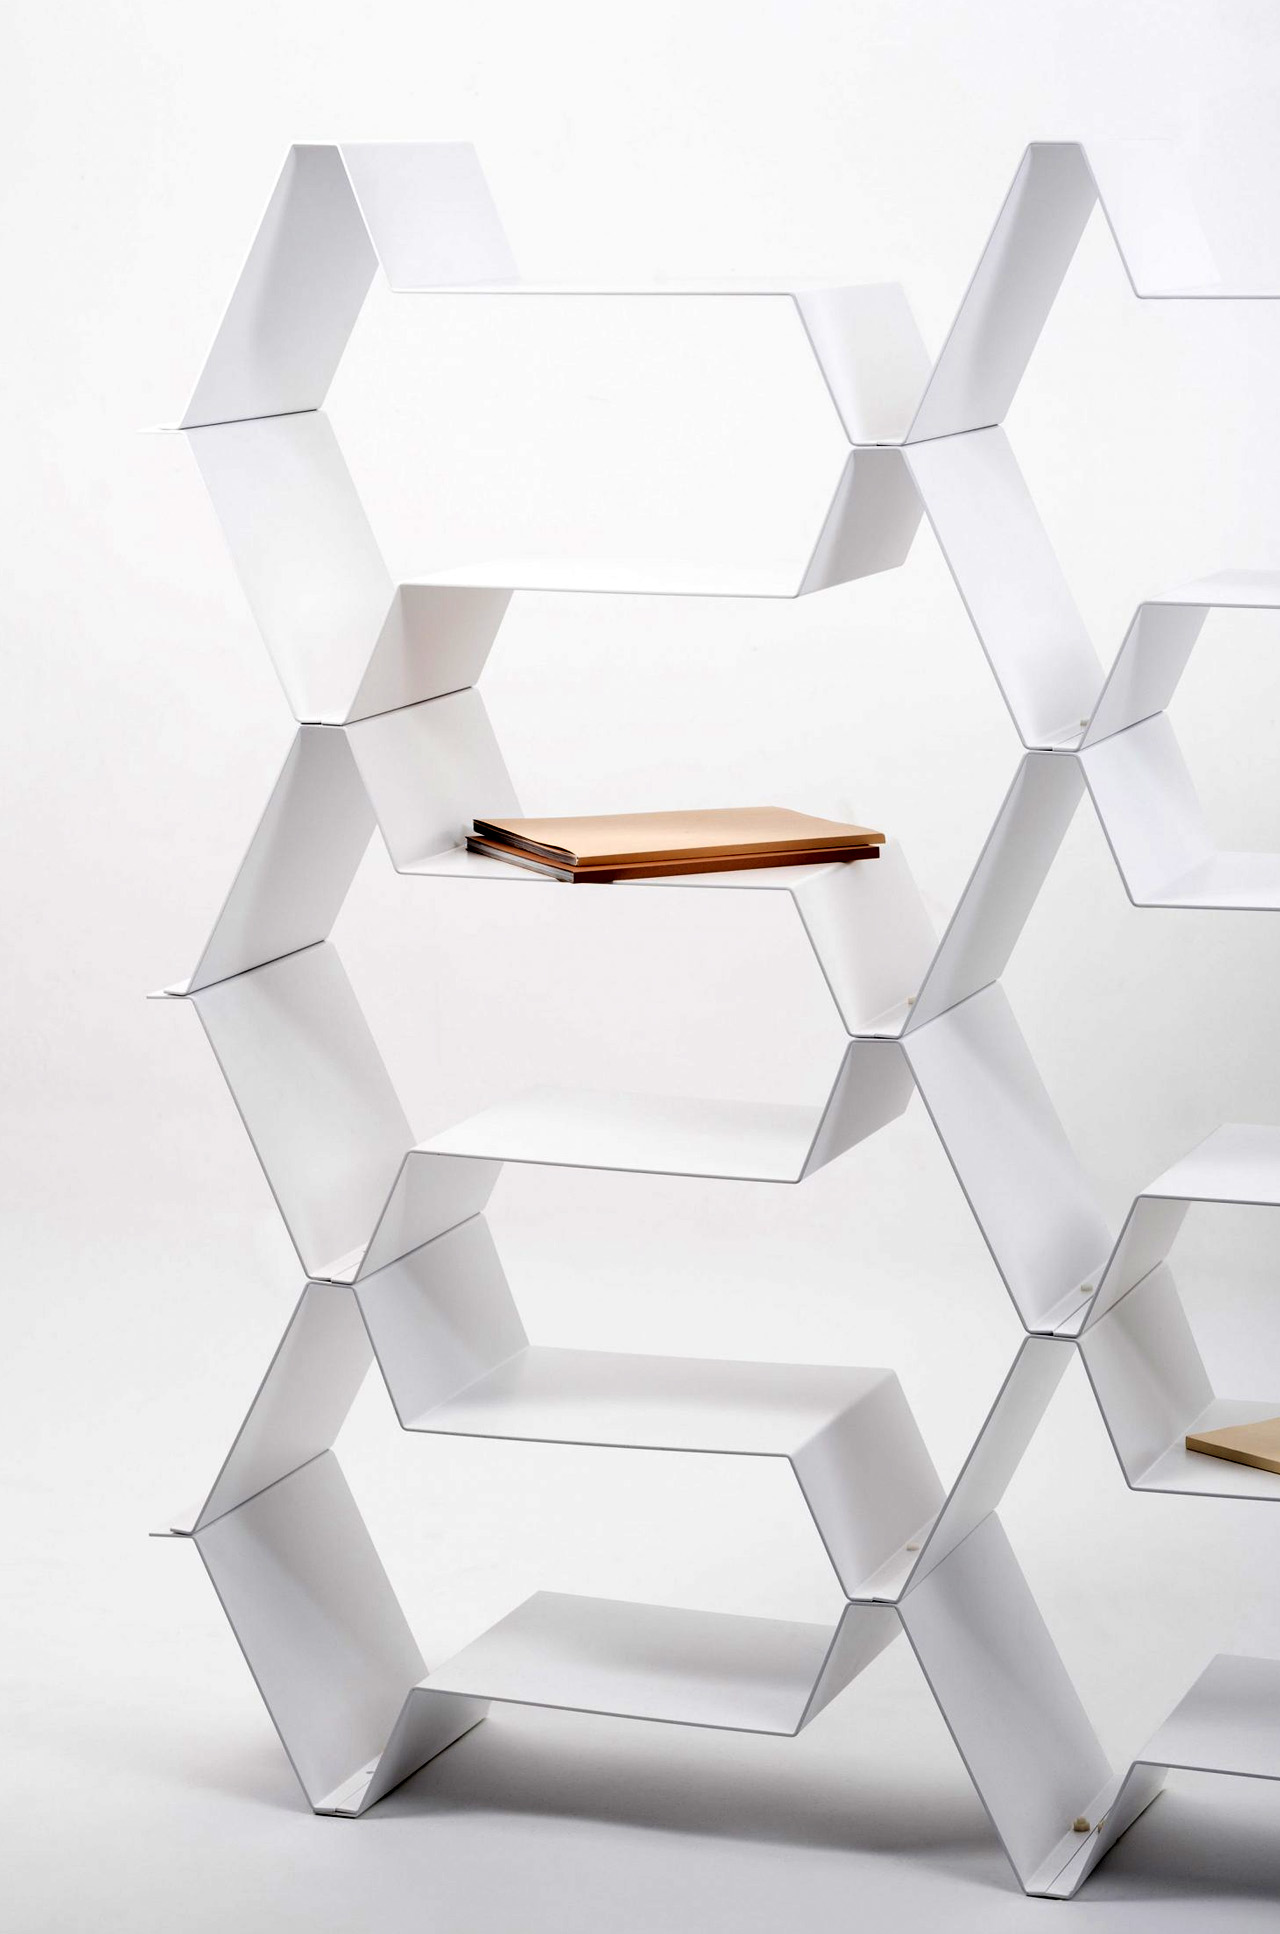 This minimal multifunctional furniture design can be configured into a bookcase, base unit or room divider